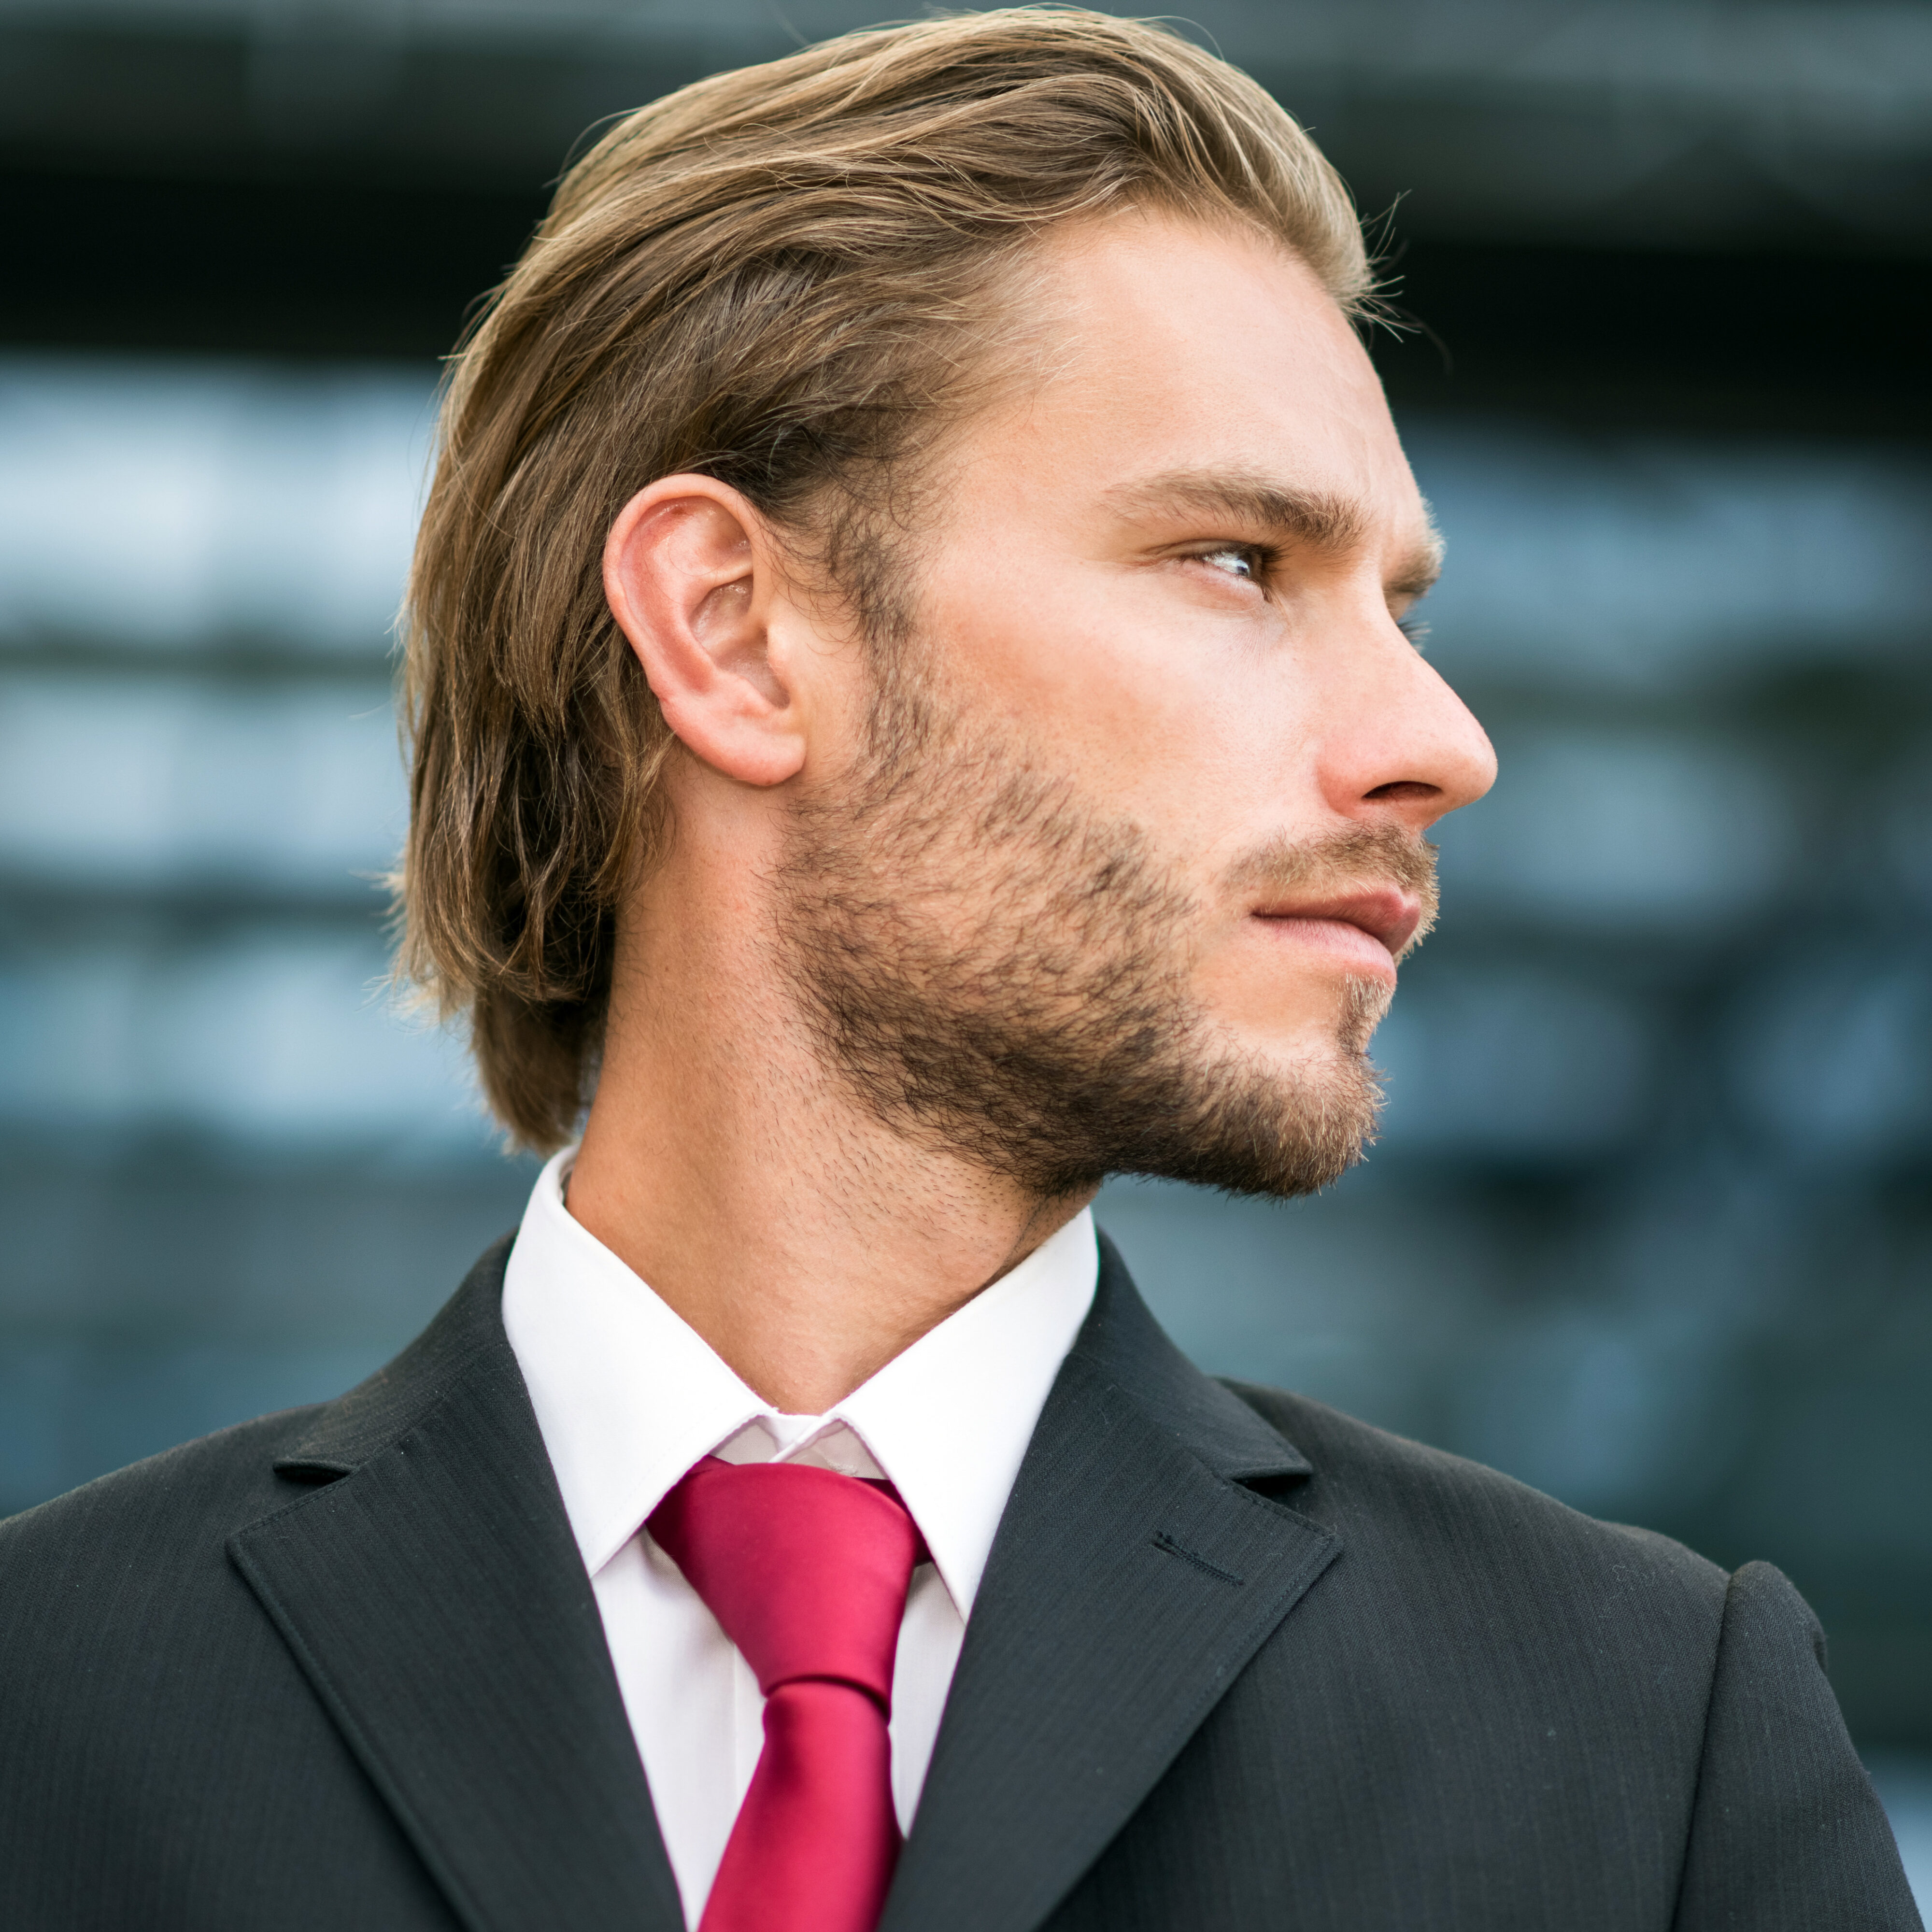 33 Awesome Slicked Back Hairstyles for Stylish Guys